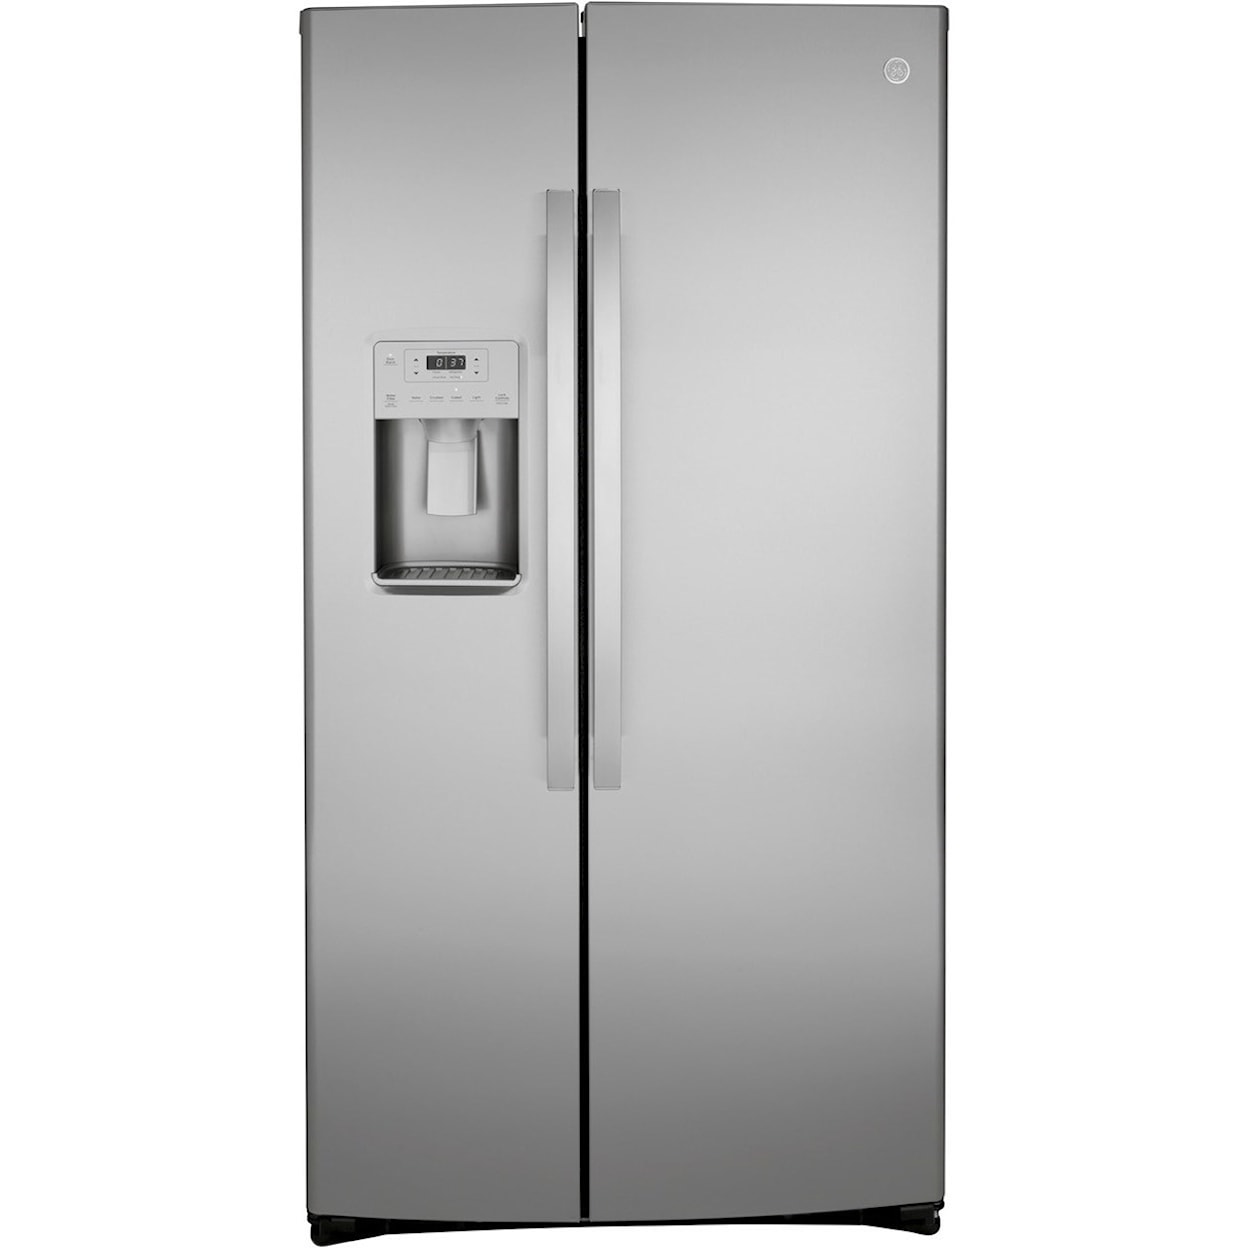 GE GSS25GYPFS 25.3 Cu. ft. Side-By-Side Refrigerator - Stainless Steel